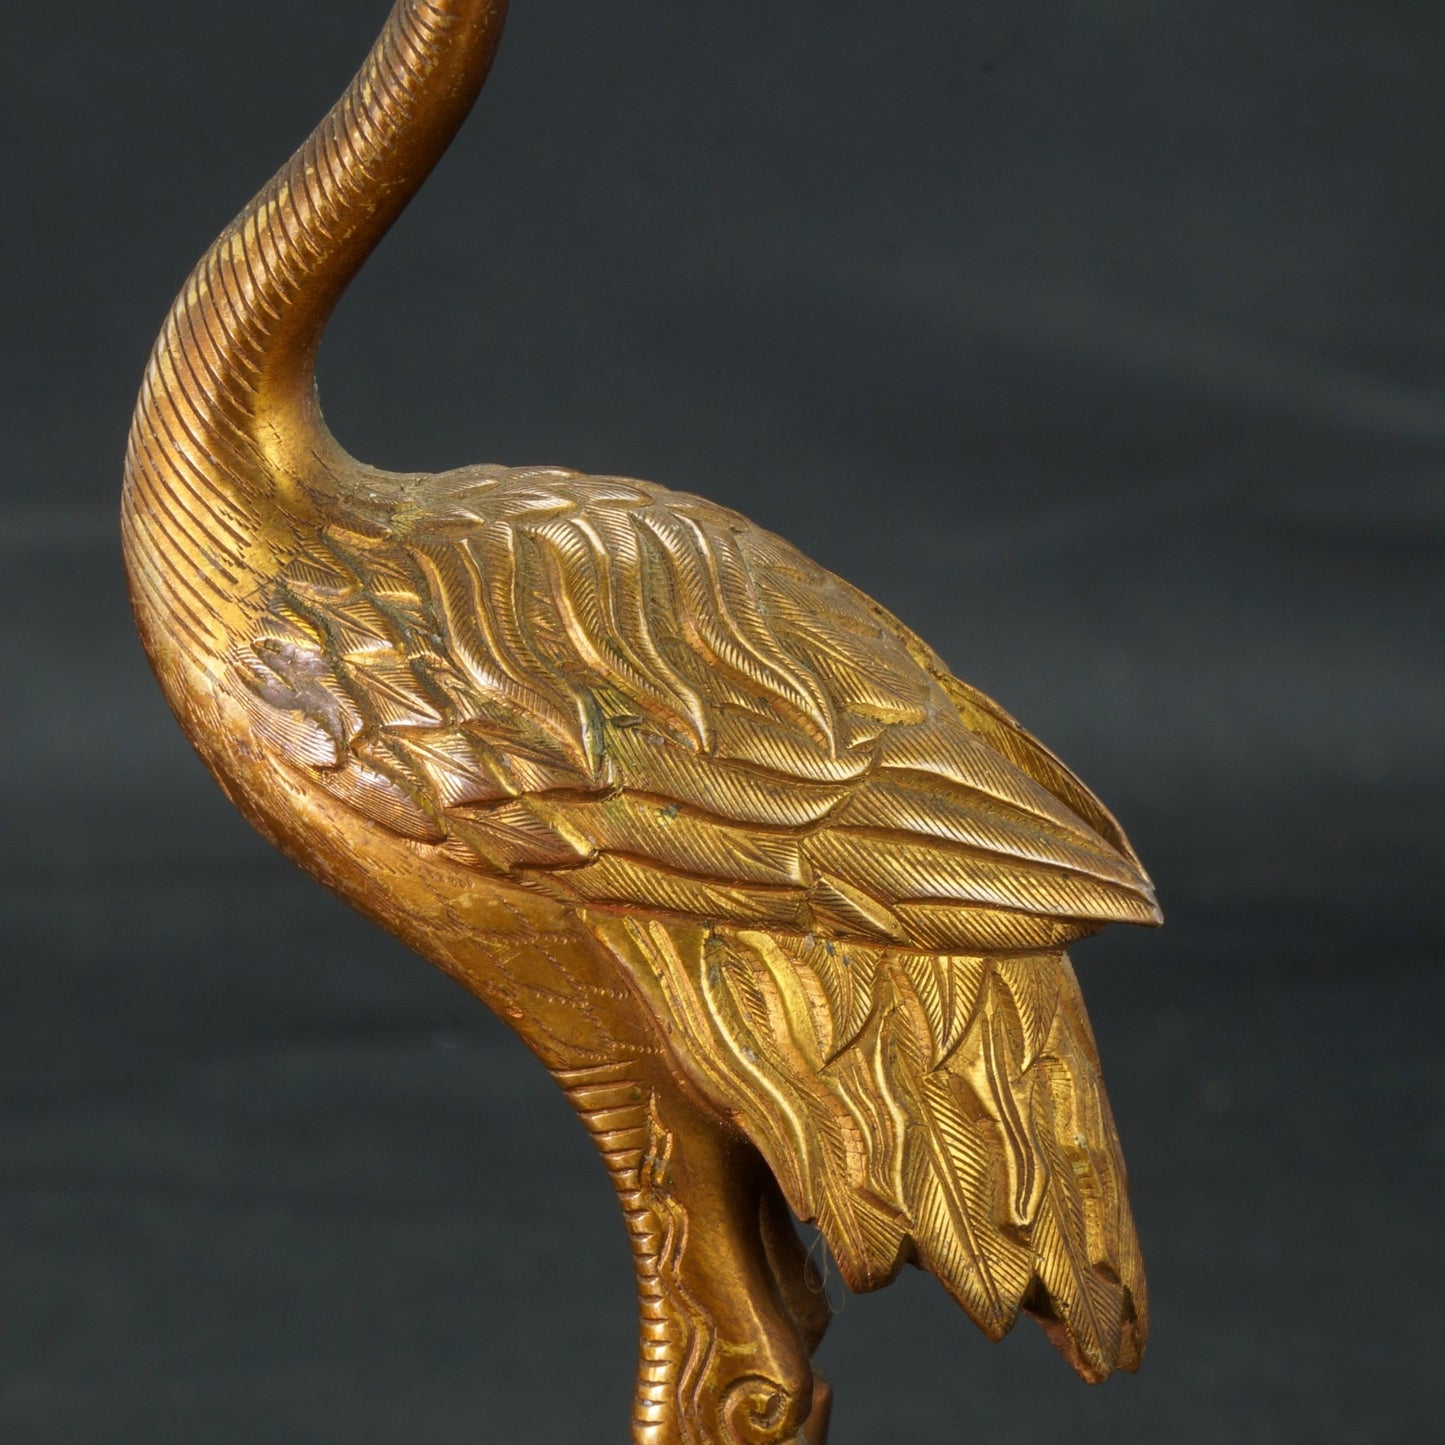 Antique Chinese Gilt Bronze Crane Figure Incense Holder 18th/19th Century - Bear and Raven Antiques